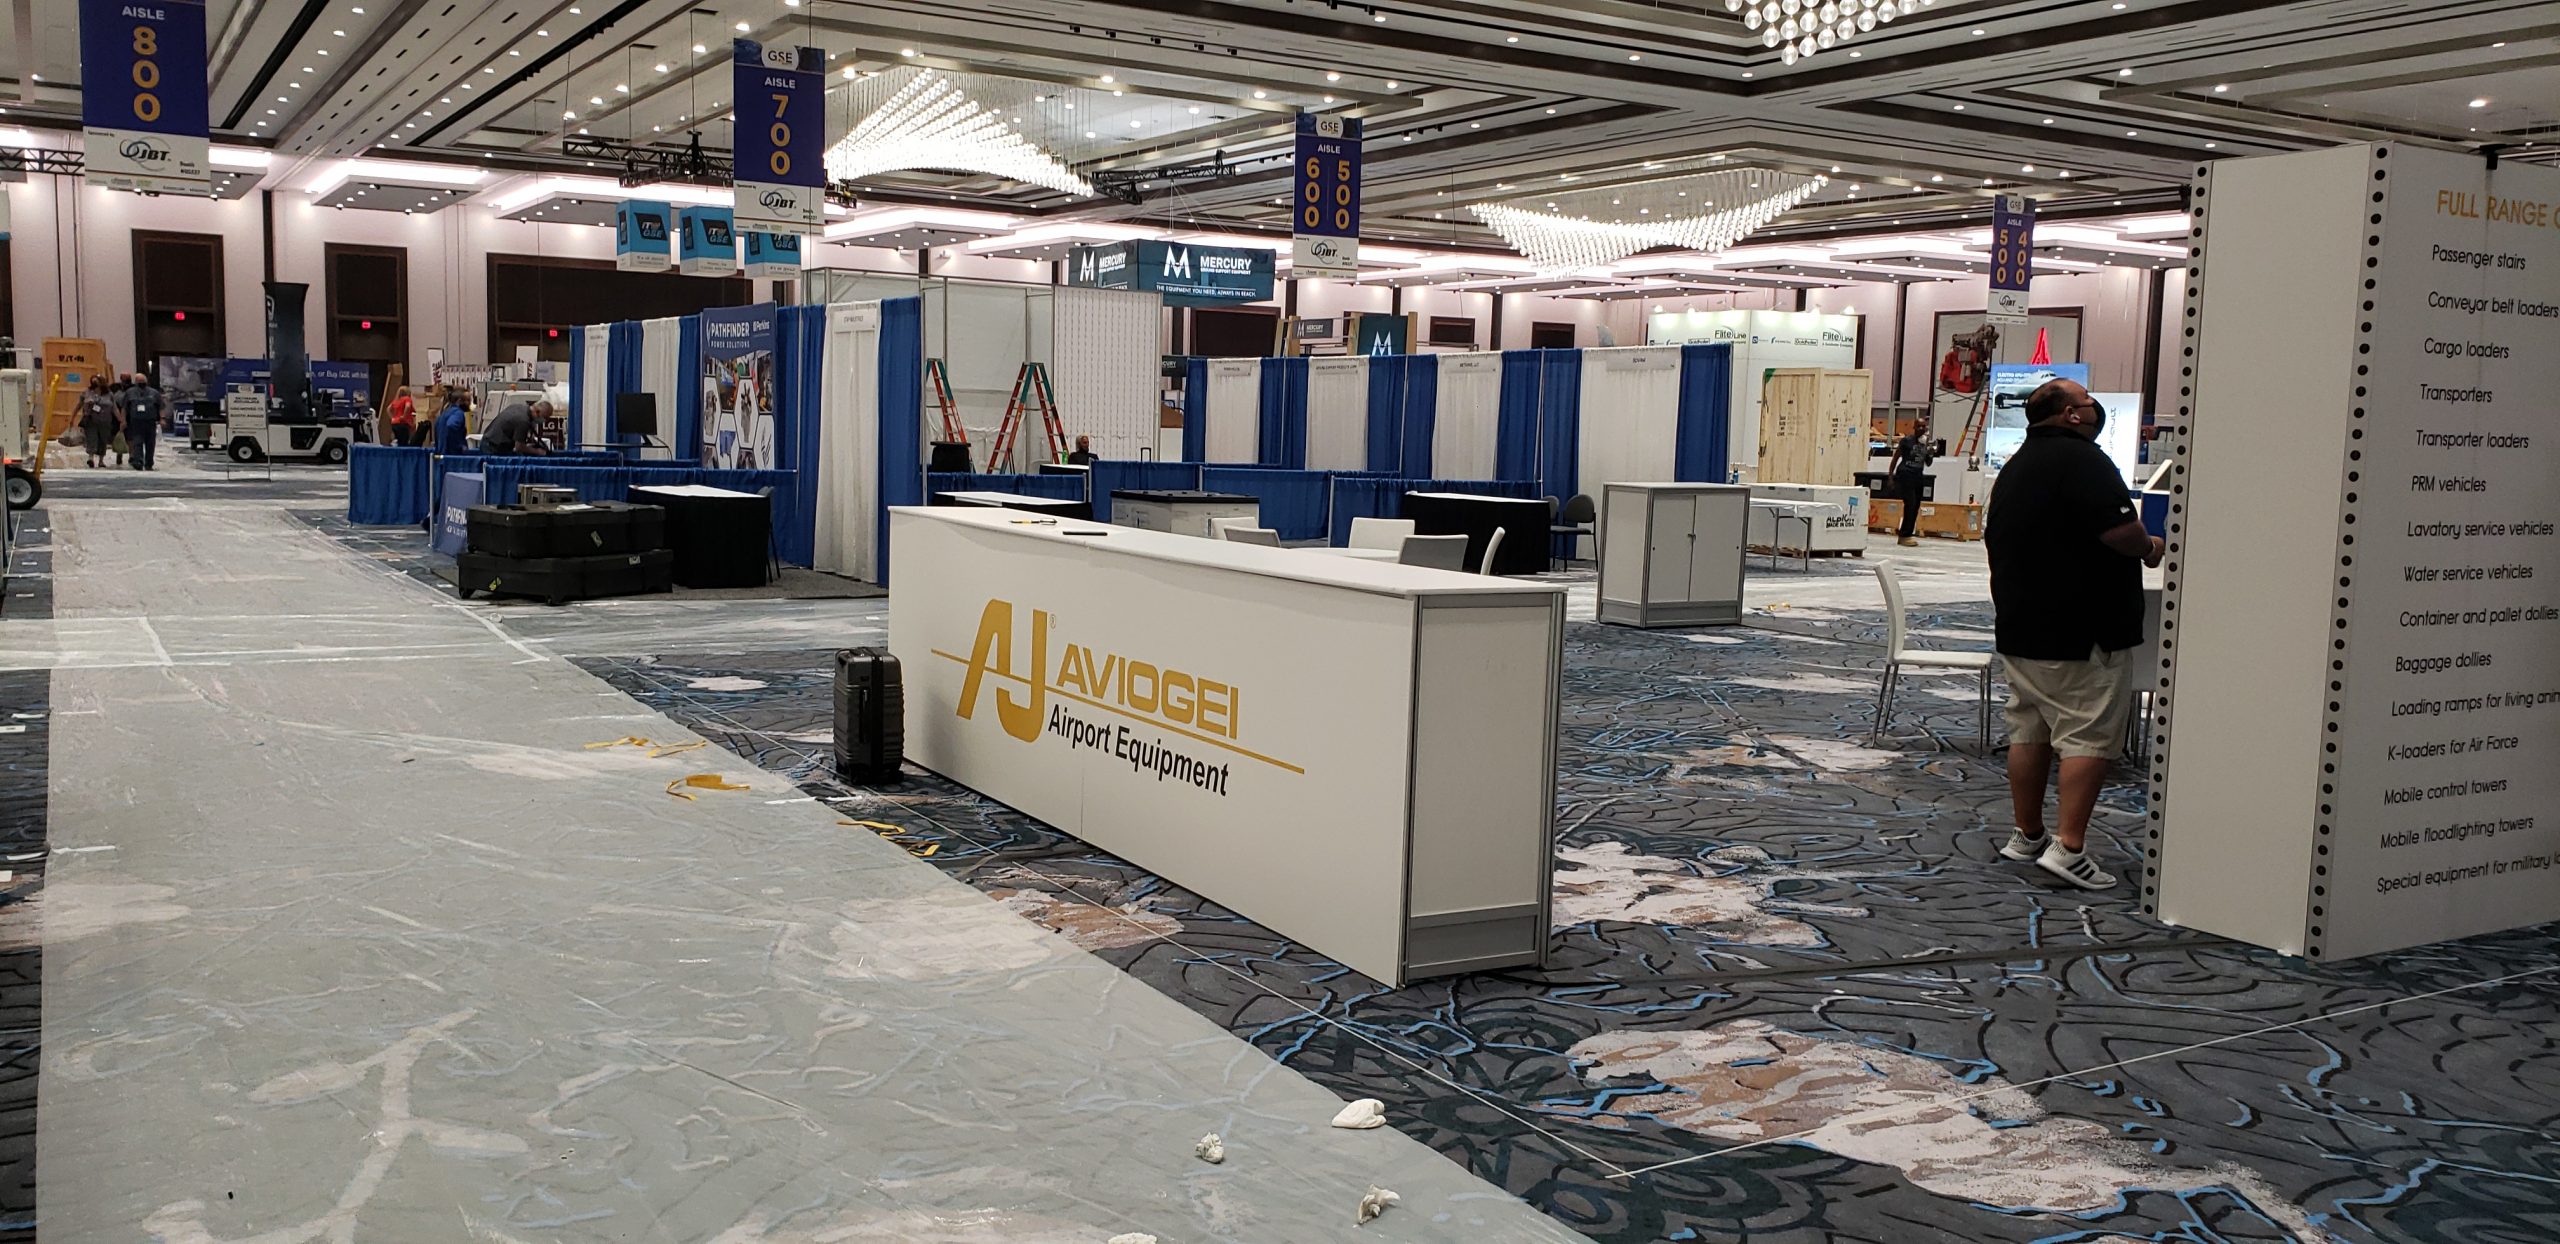 Amazing Exhibition Booth Design Ideas for Your Next Show